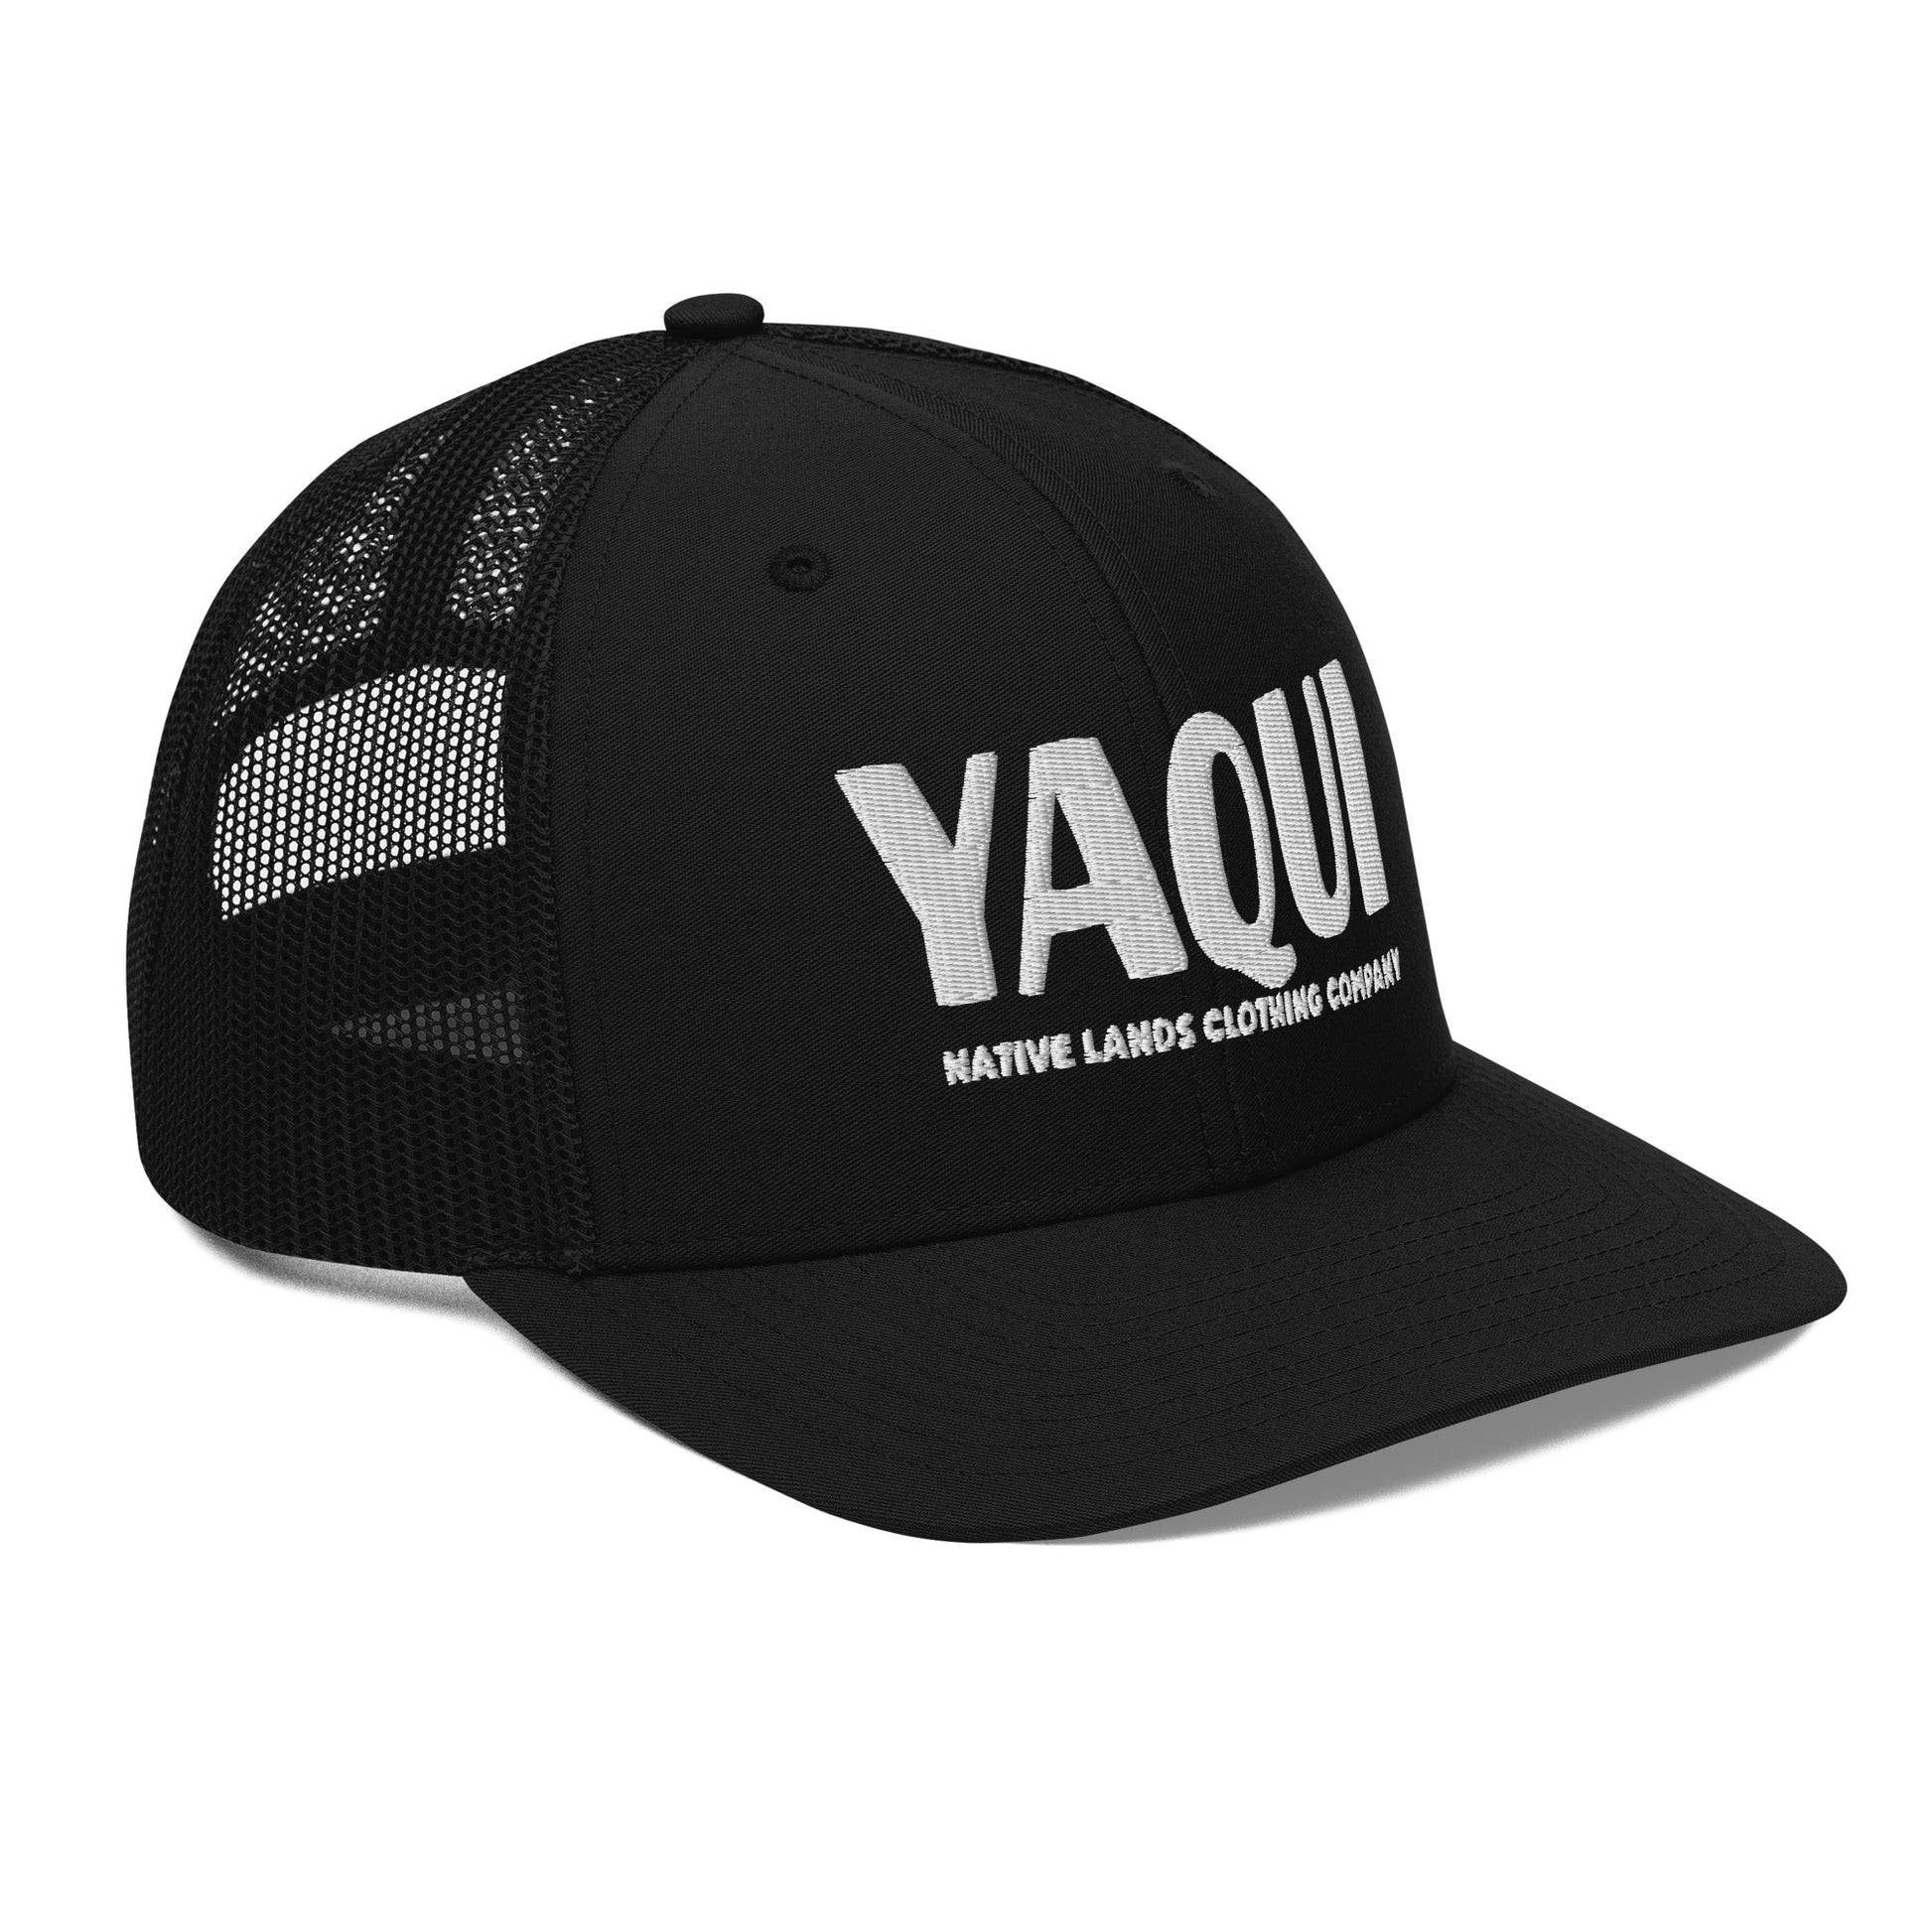 Yaqui Tribe Trucker Cap Embroidered Native American Native Lands Clothing Company LLC